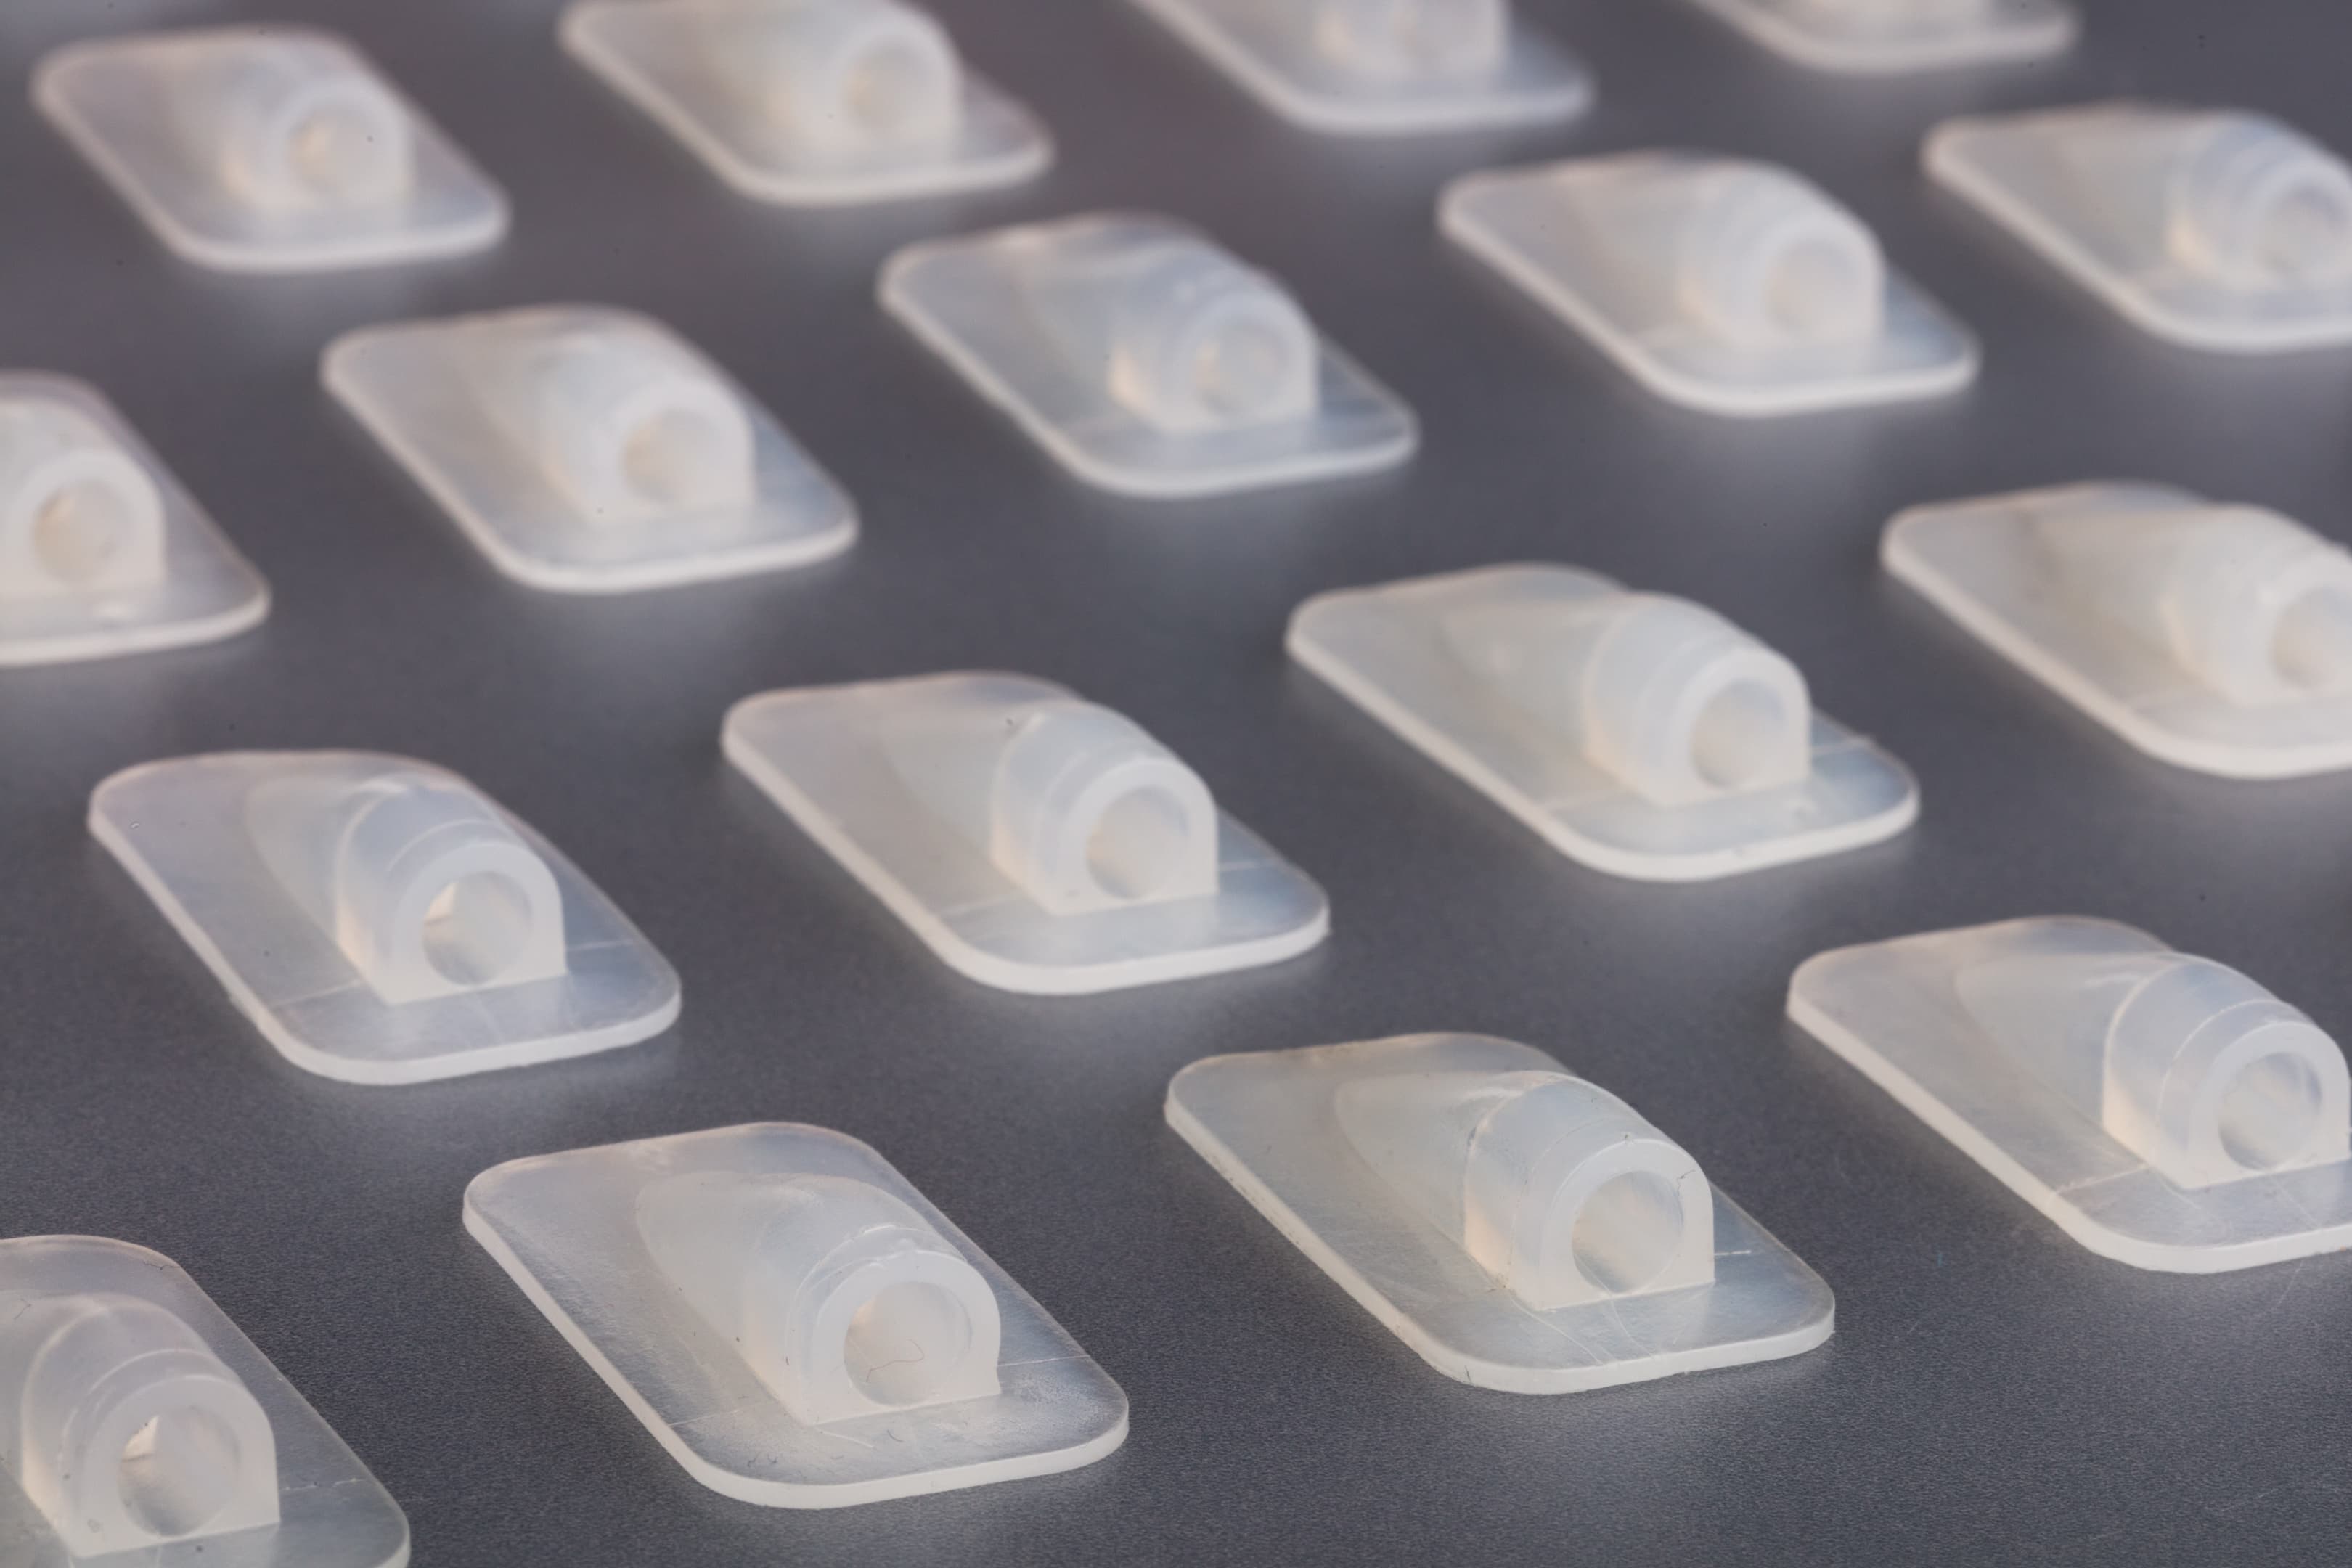 200 pieces small-batch run from additive manufactured injection molding tool